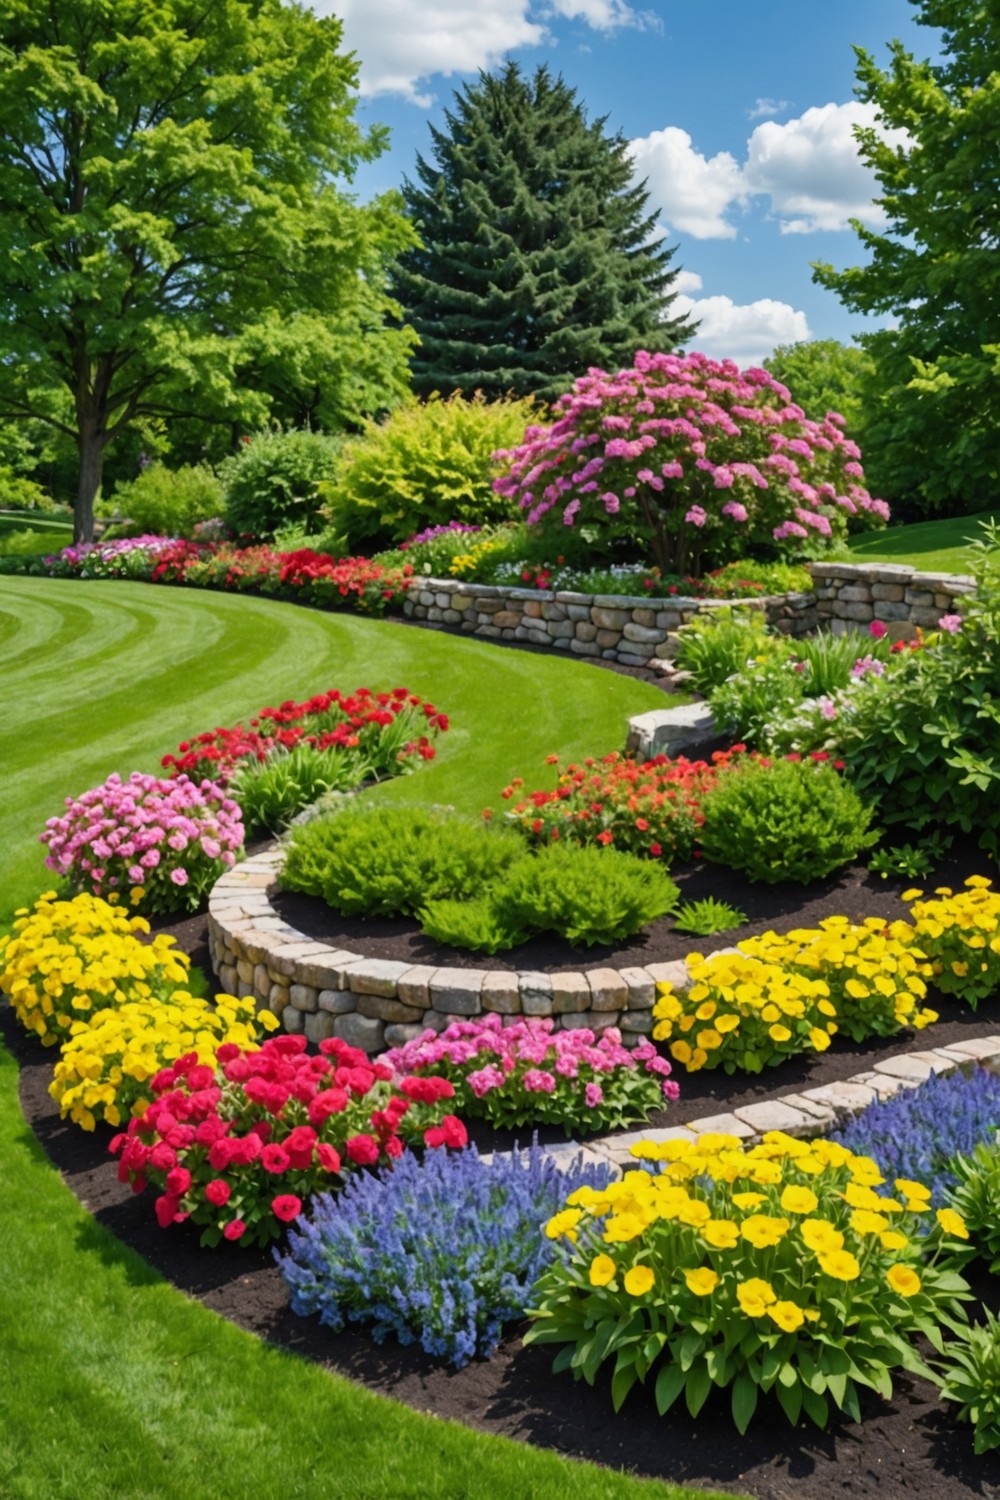 Curved Retaining Wall with Colorful Flower Arrangement